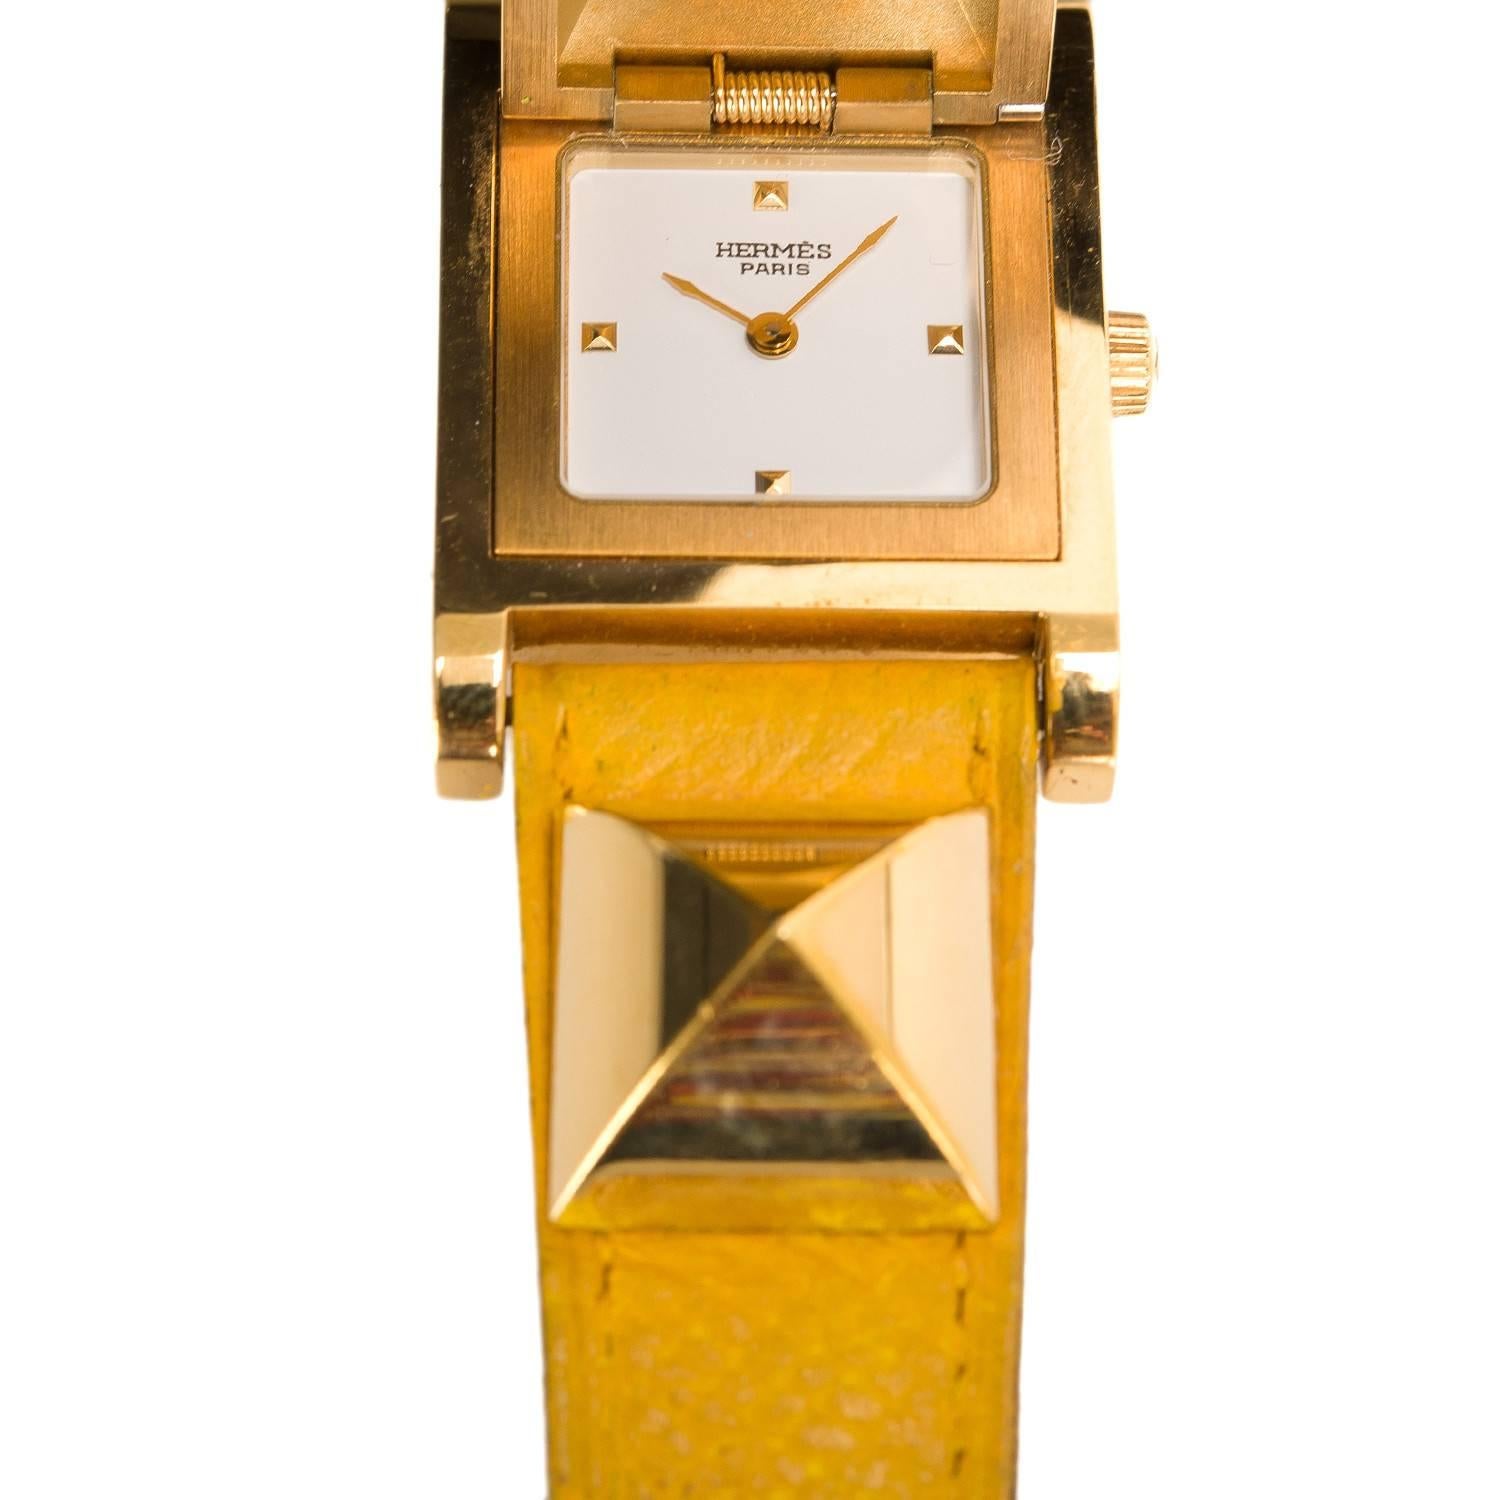 Hermes Medor watch in yellow courcheval in a size PM.

This stunning style made of gold plated stainless steel features swiss quartz movement, white dial, sapphire crystal push-pull crown, and adjustable Yellow courcheval band with an Hermes stamped